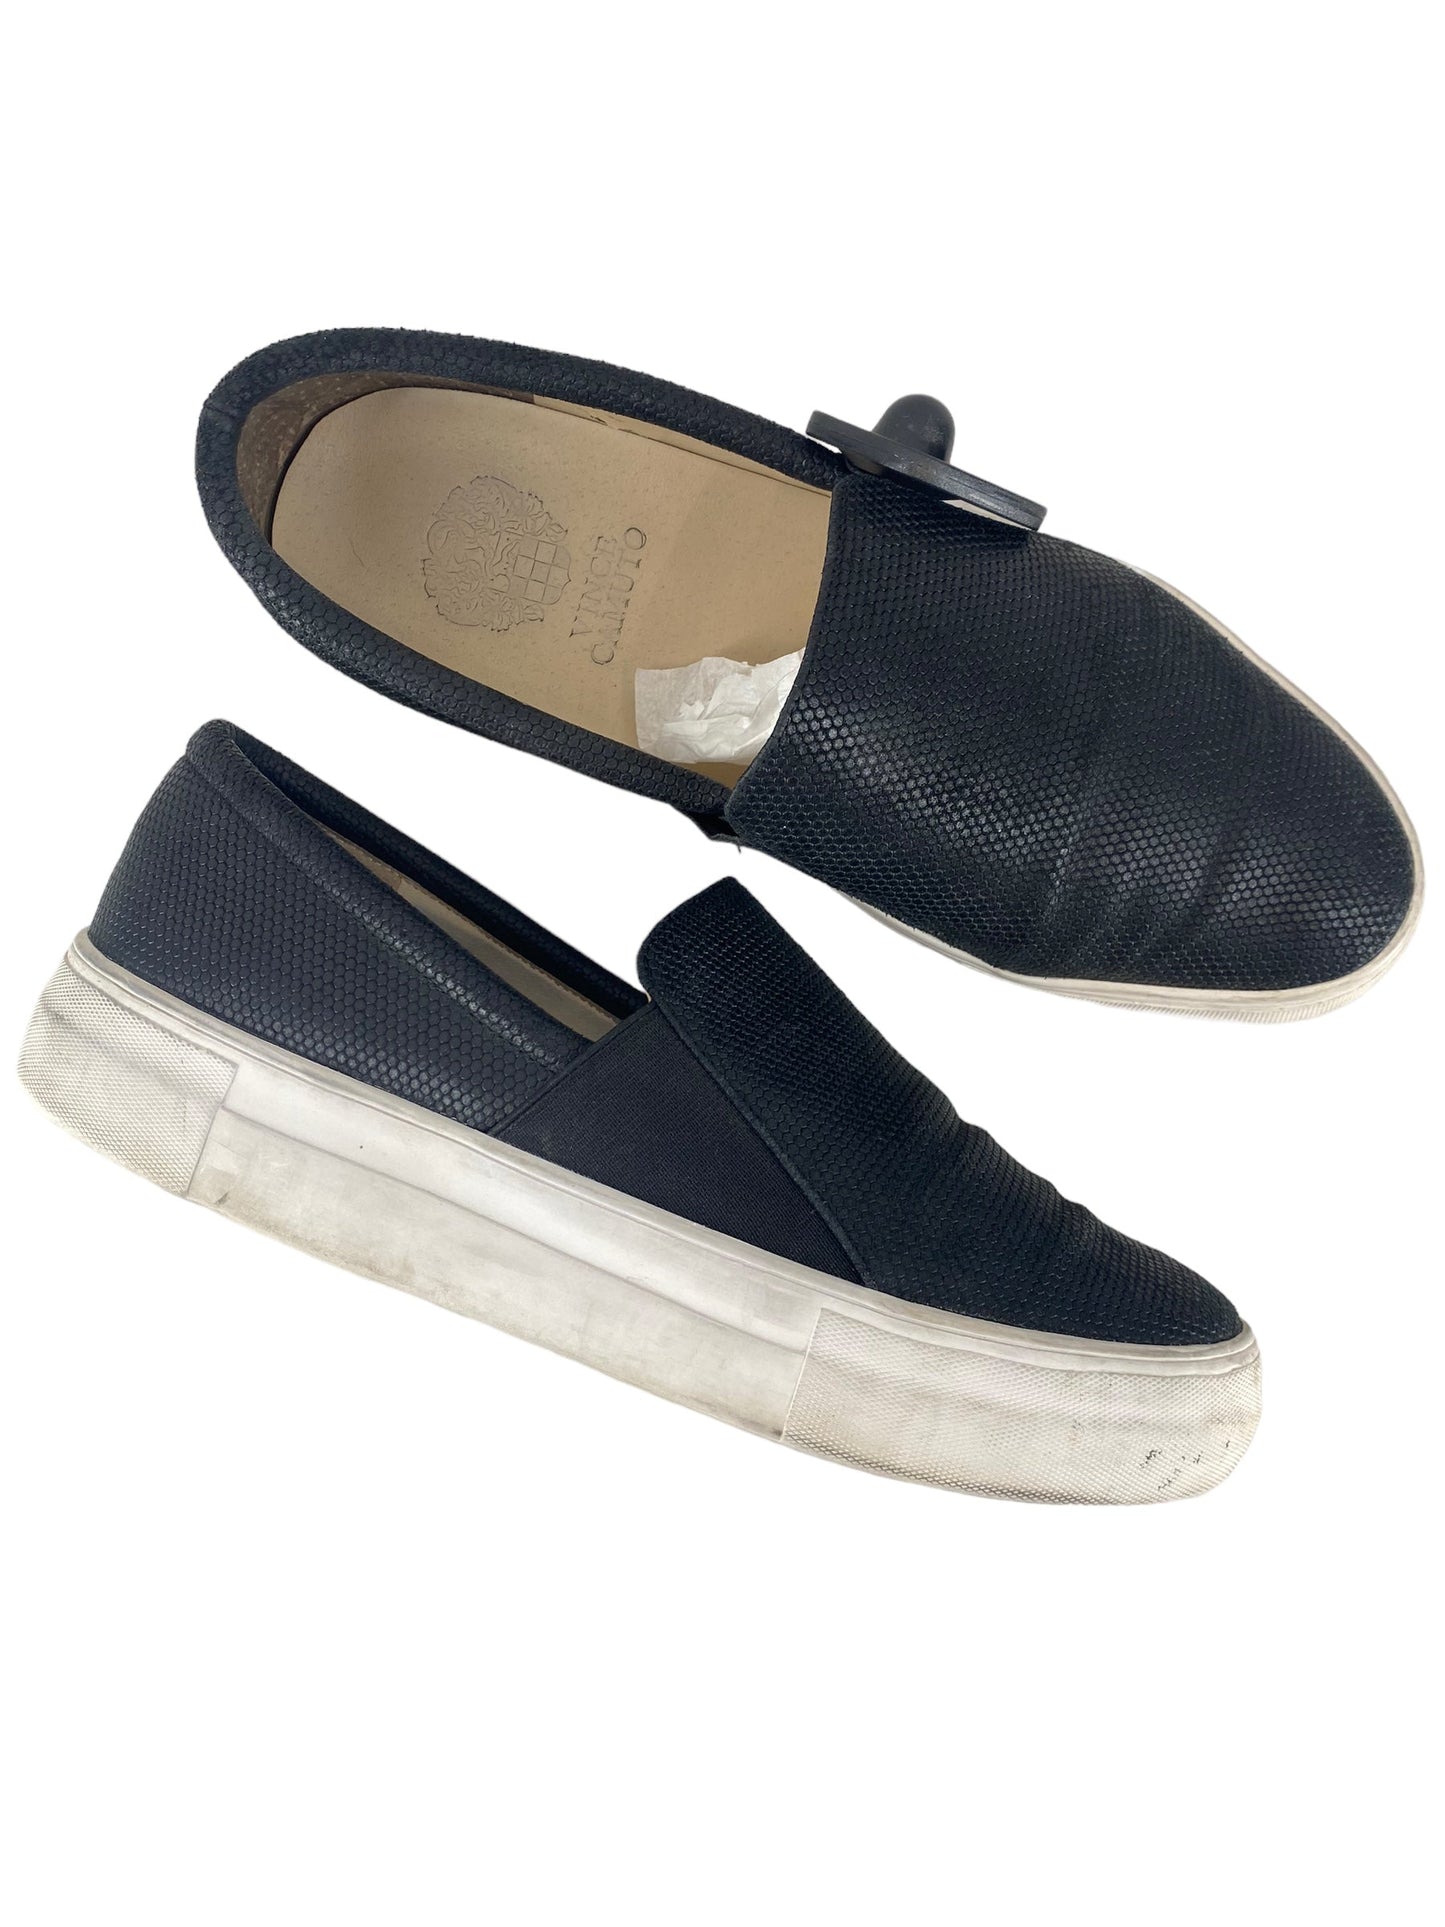 Shoes Flats By Keds  Size: 9